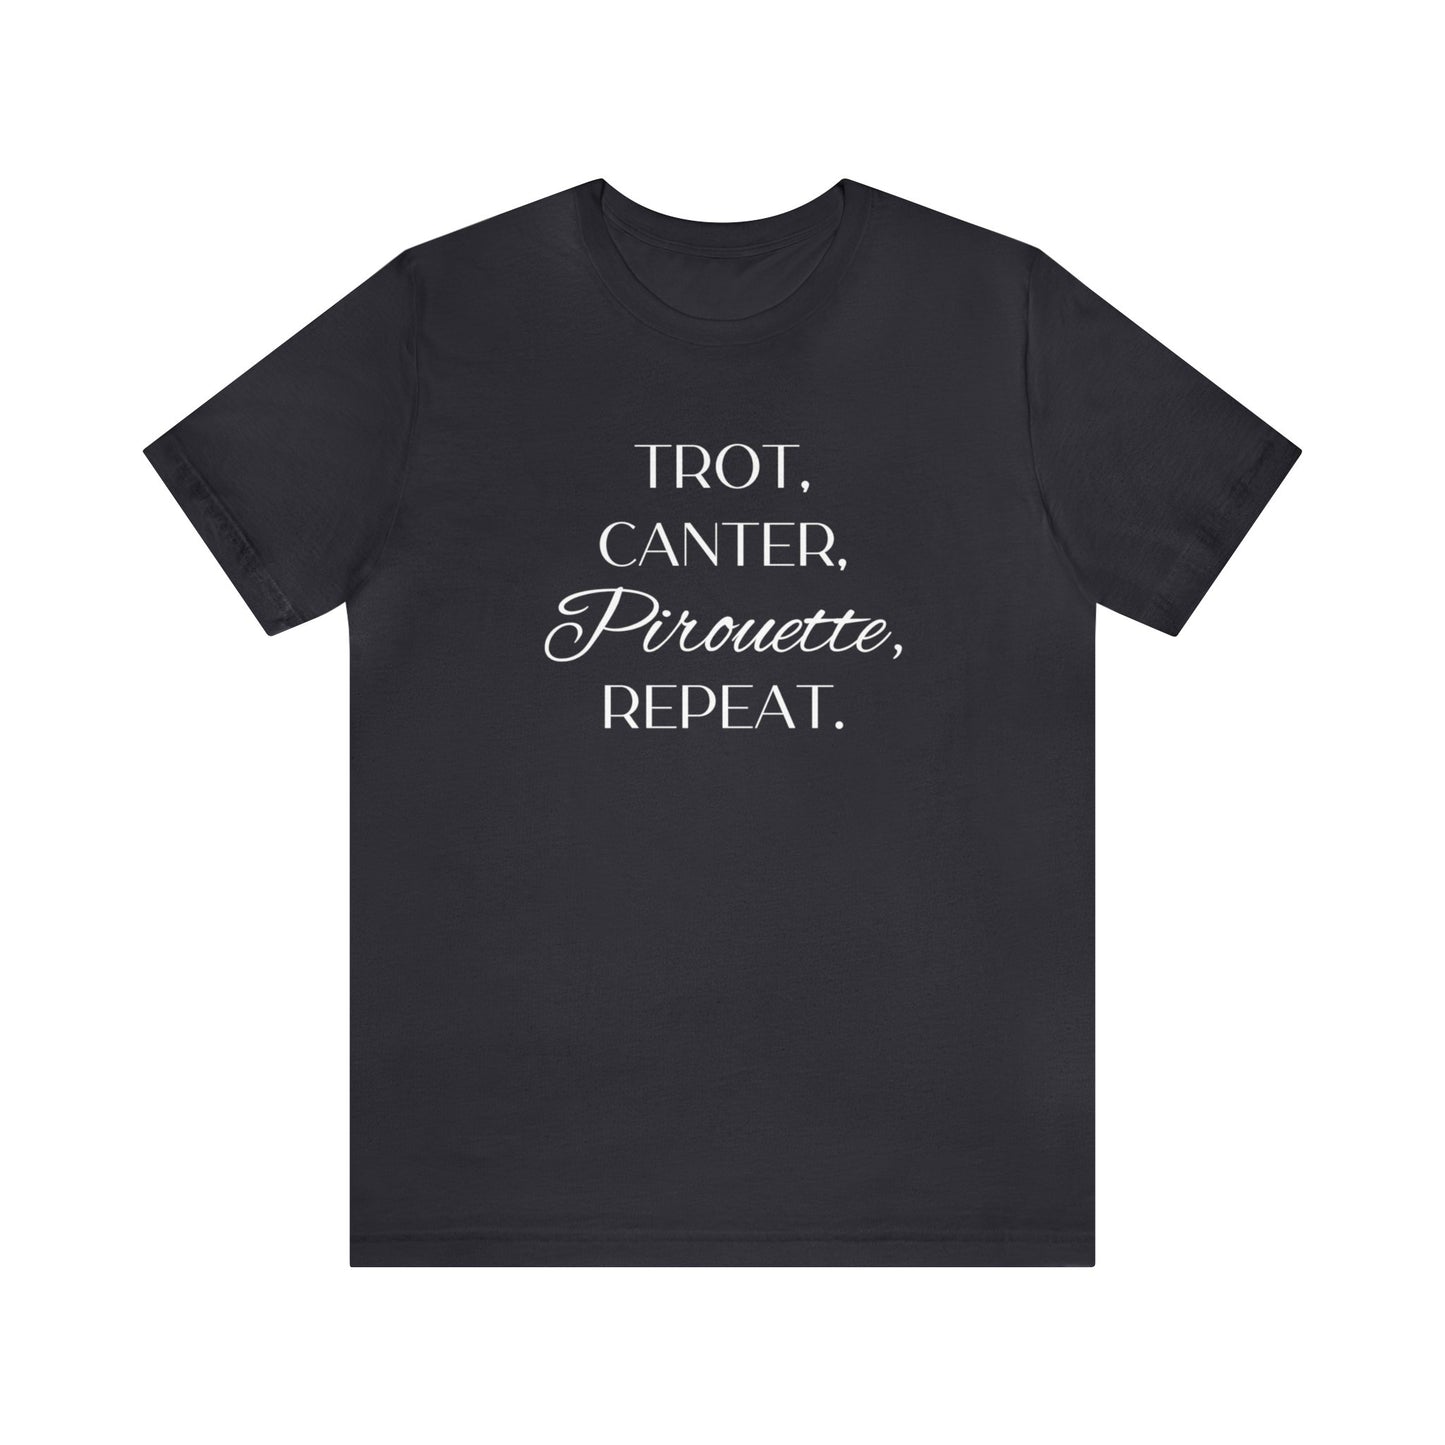 Trot, Canter, Pirouette, Repeat. T-shirt